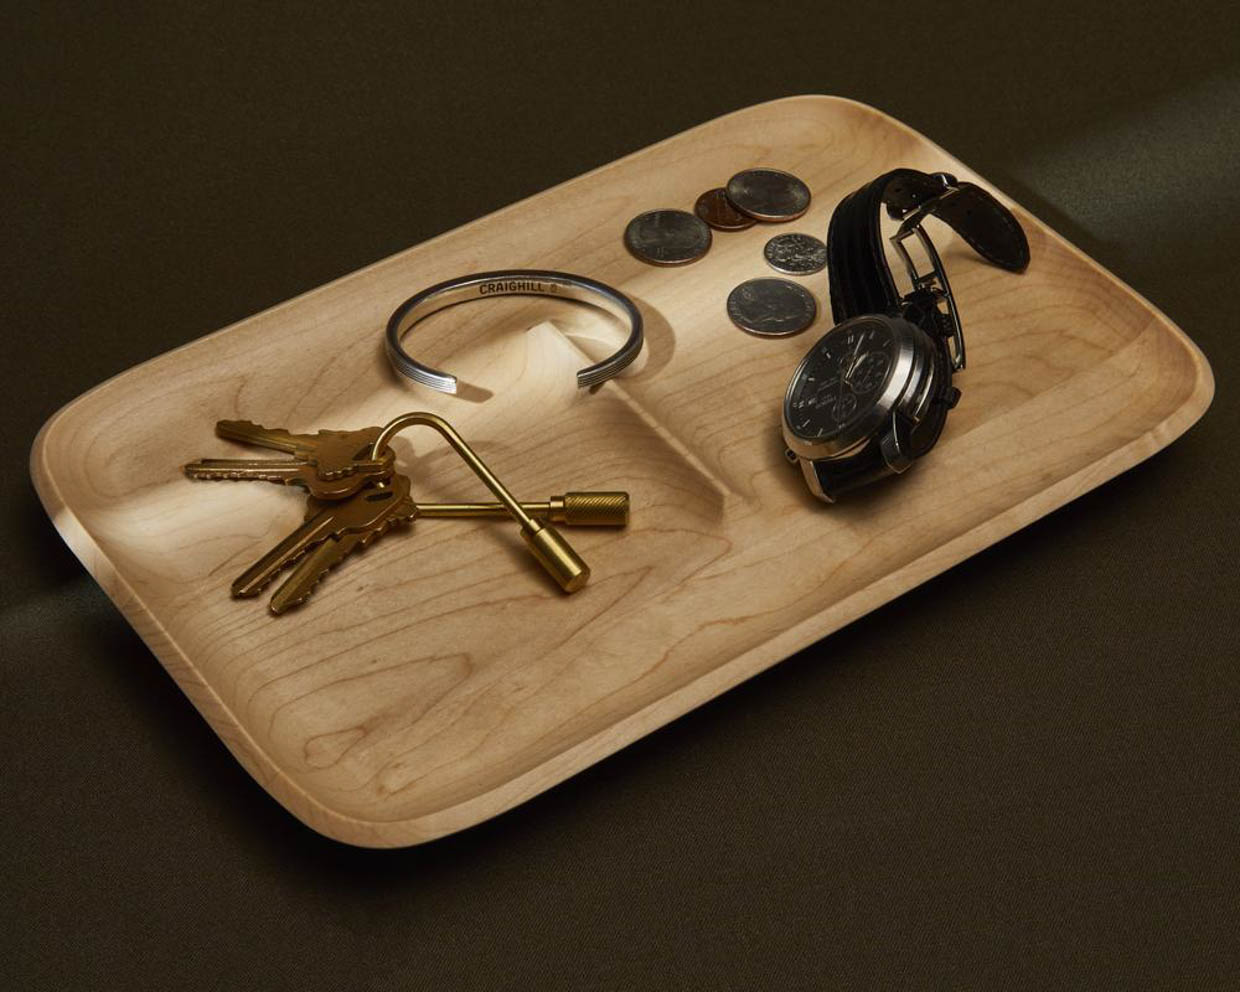 Nocturn Catch Tray